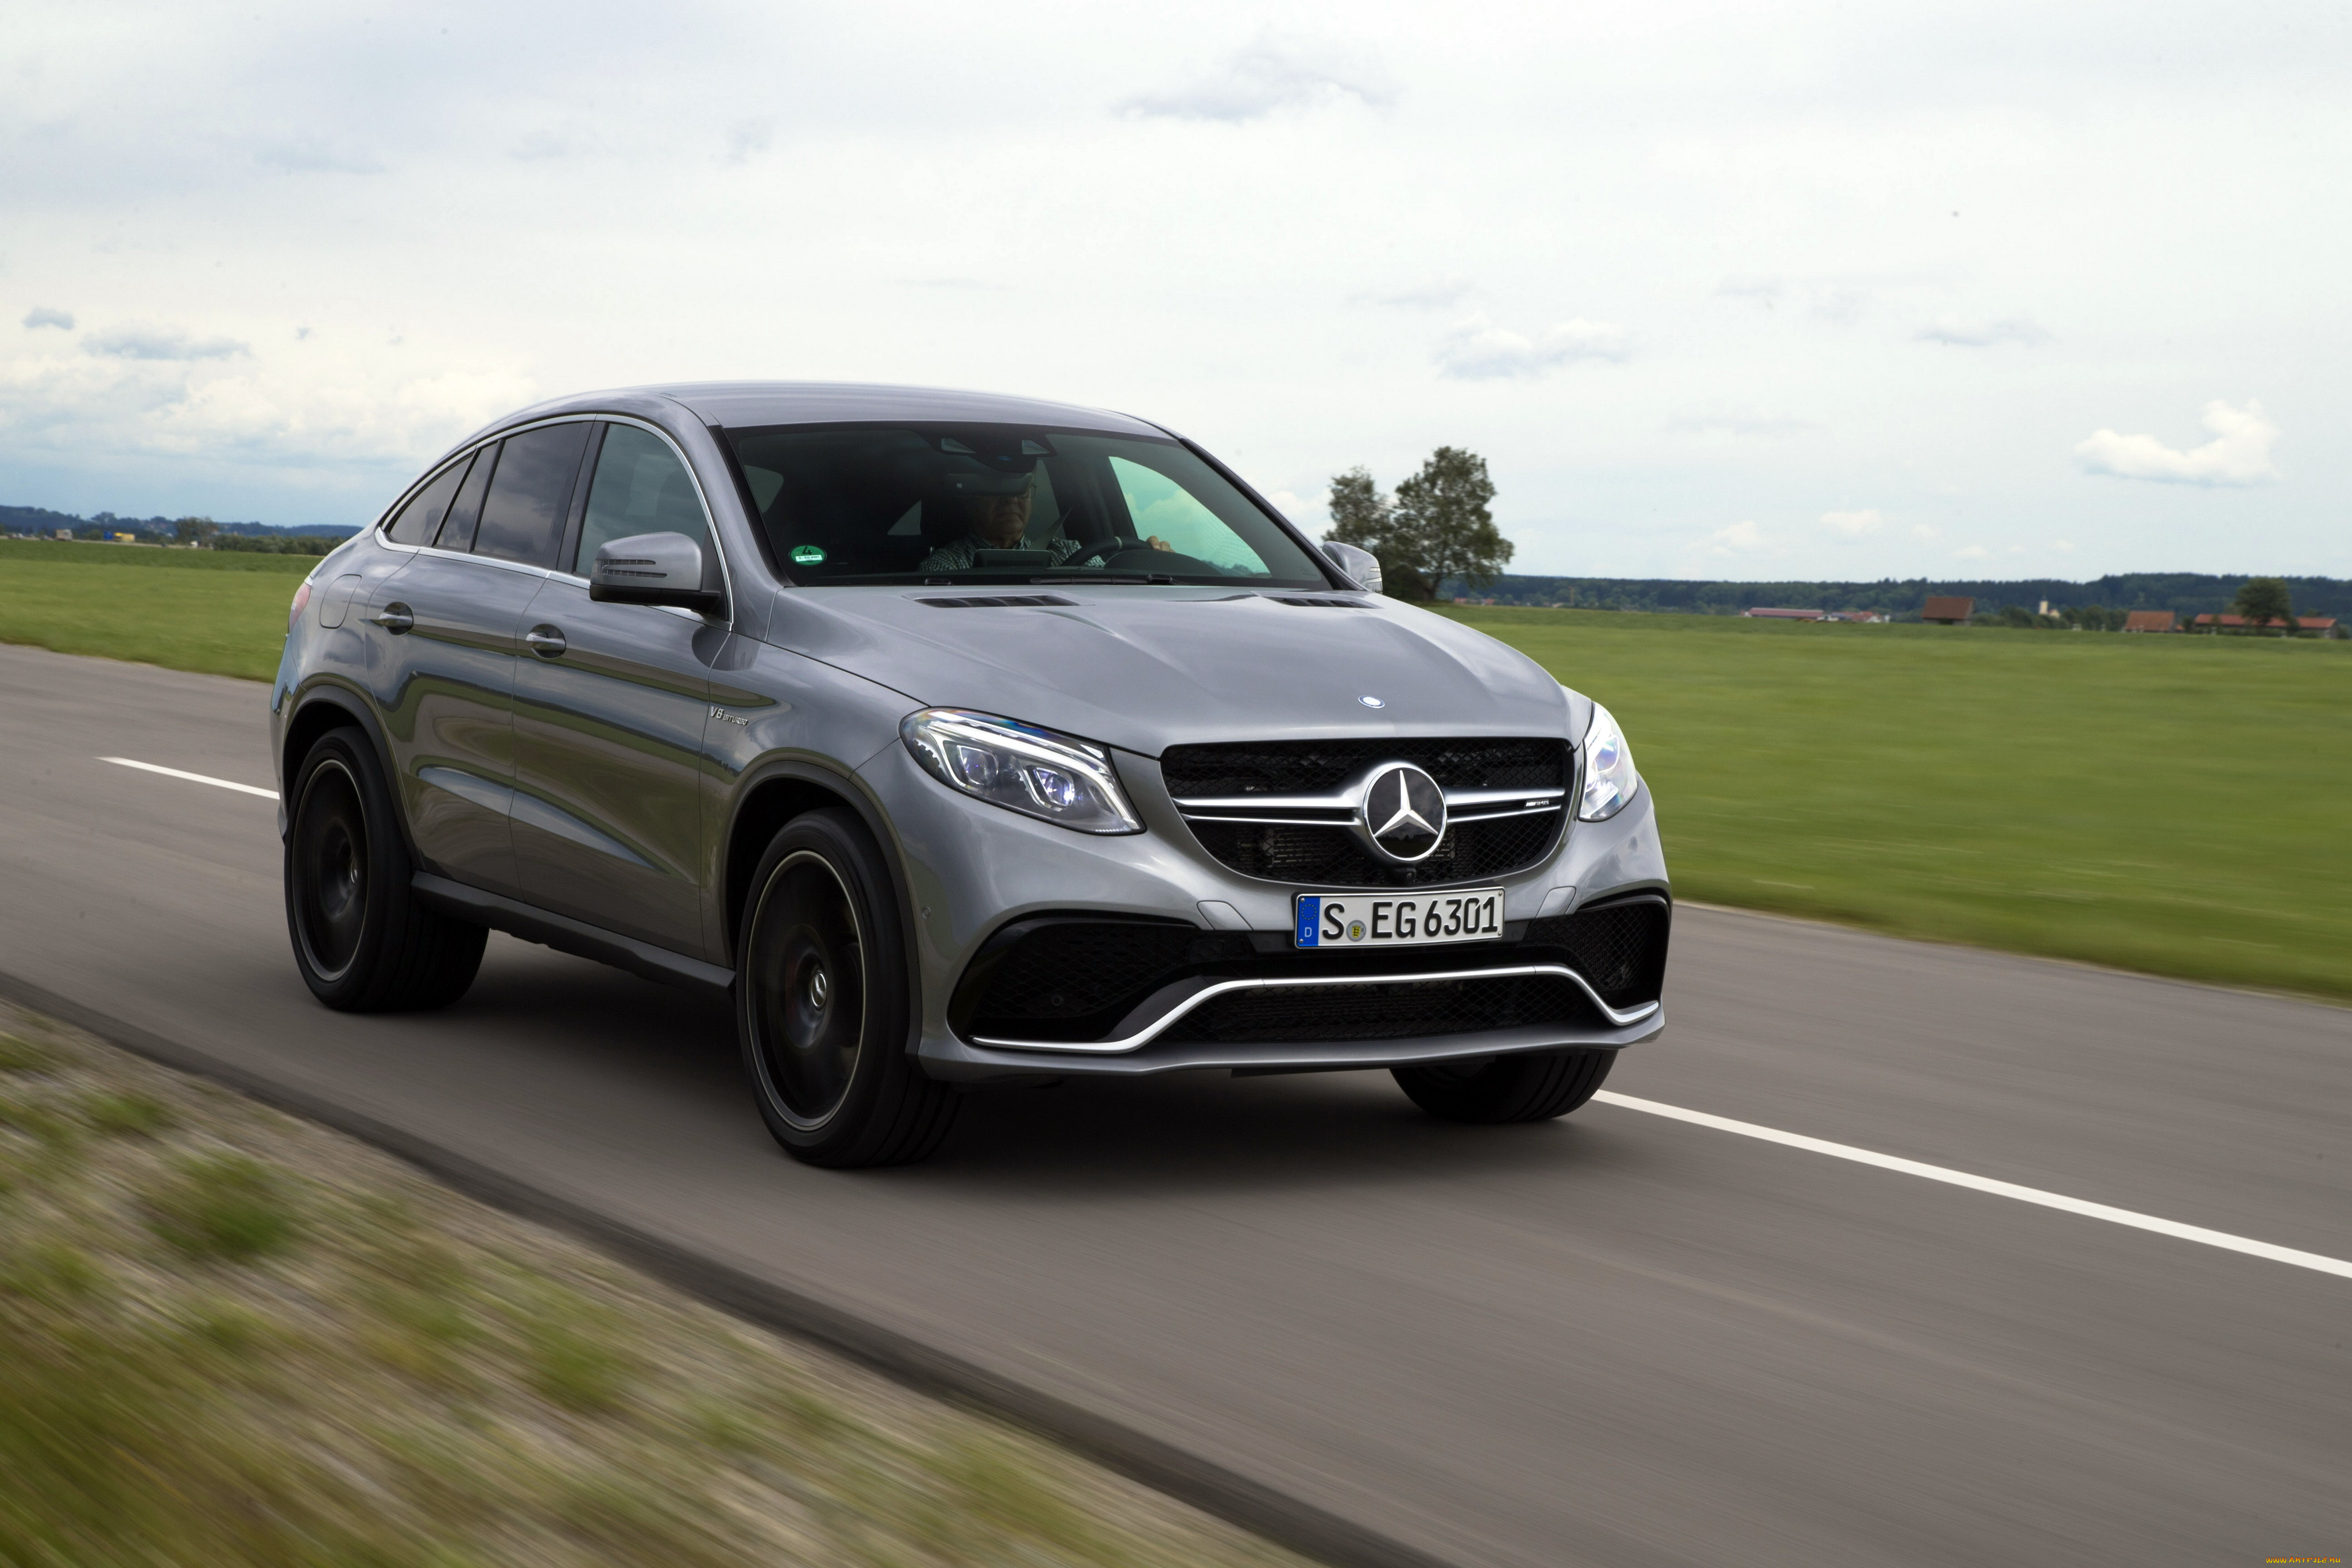 , mercedes-benz, gle, 63, mercedes-amg, 2015, c292, coup, s, 4matic